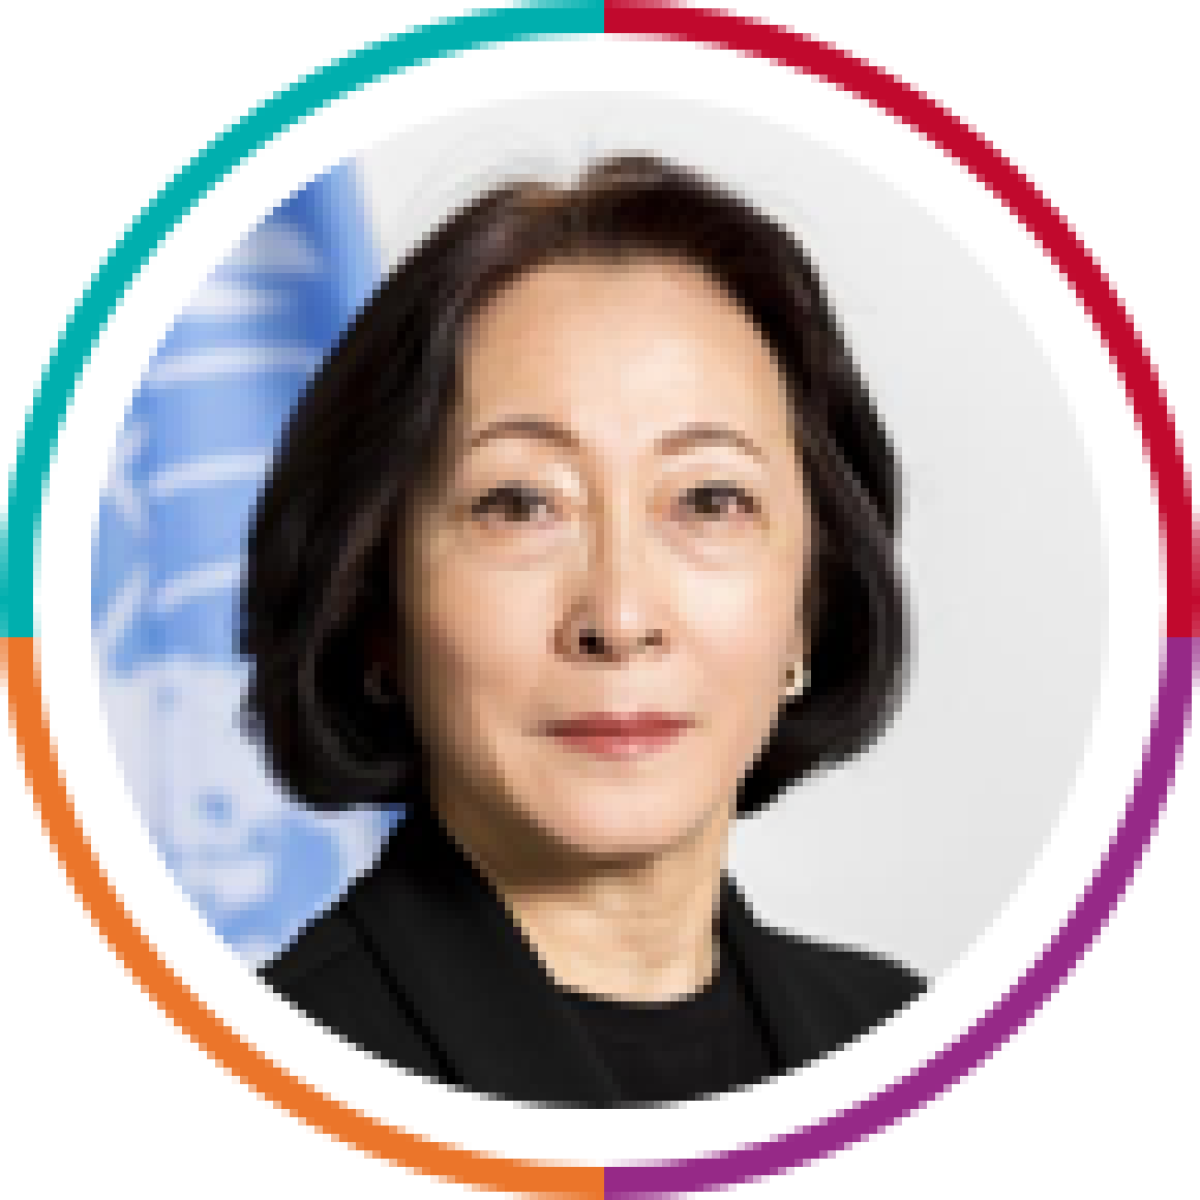 Mami Mizutori, Special Representative of the Secretary-General for Disaster Risk Reduction and Head of UNDRR